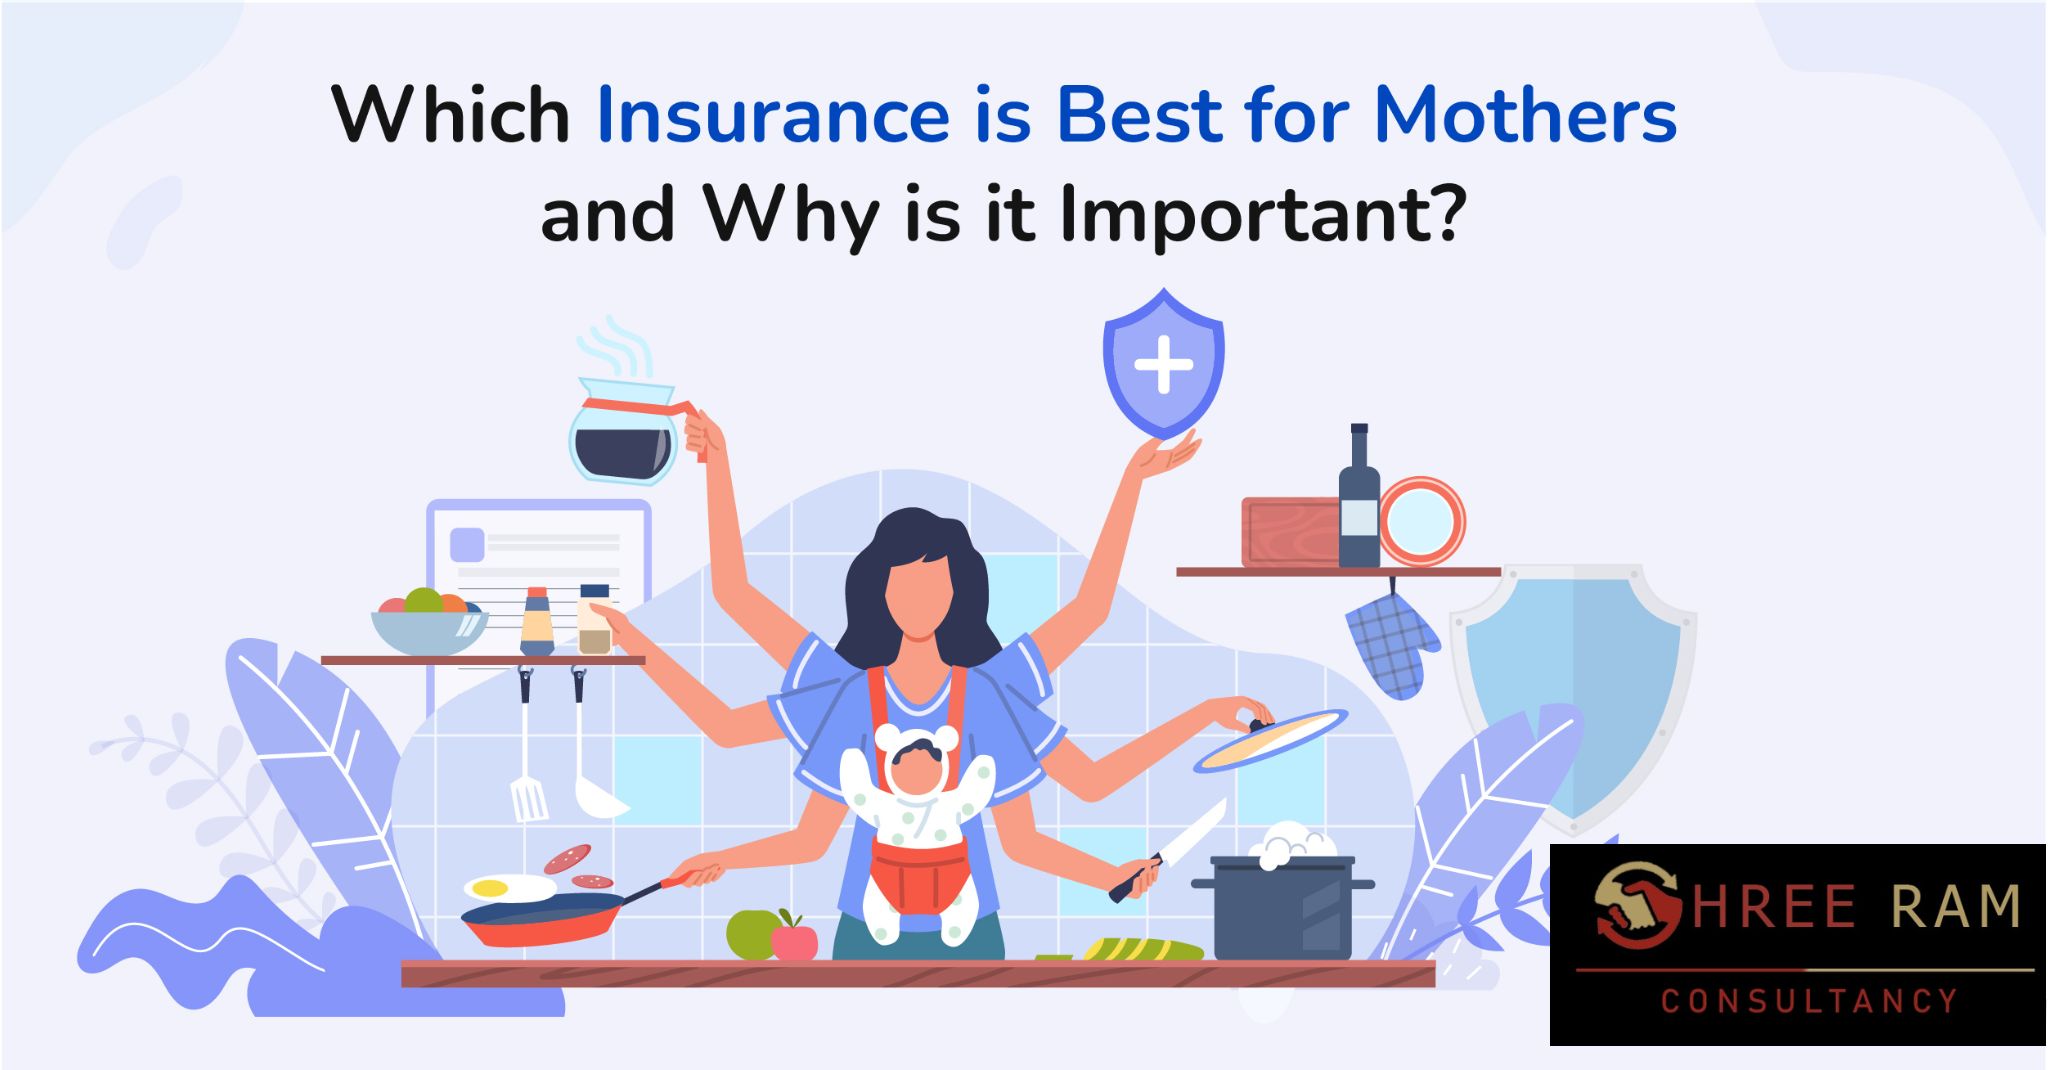 Which Insurance is Best for Mothers and Why is it Important?